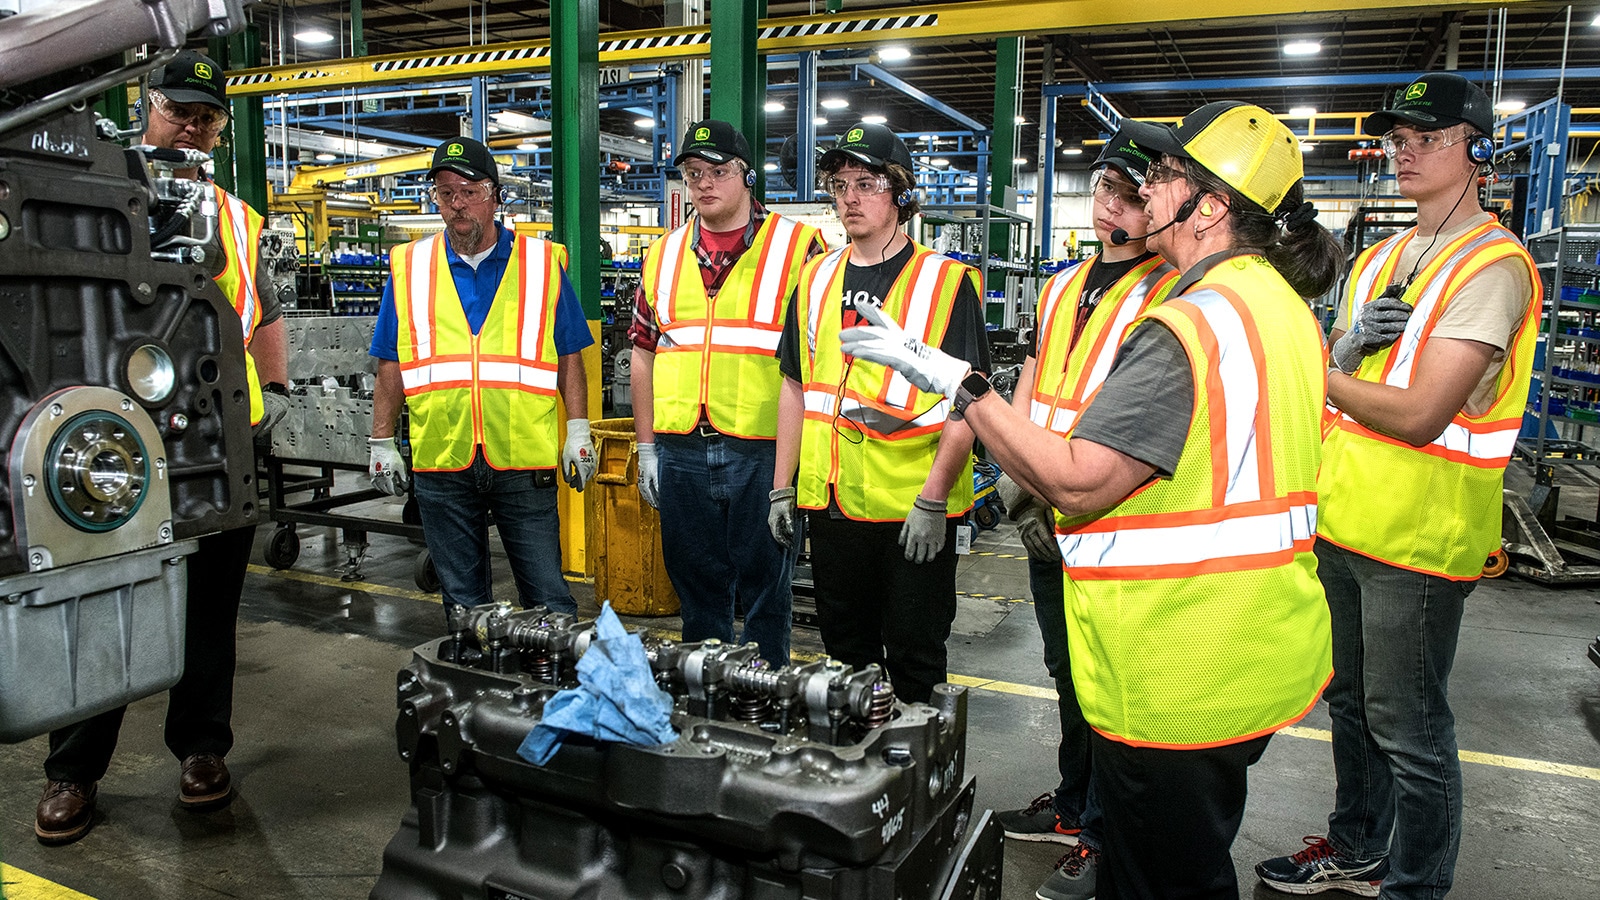 Students learn about processes and operations at the Springfield facility.